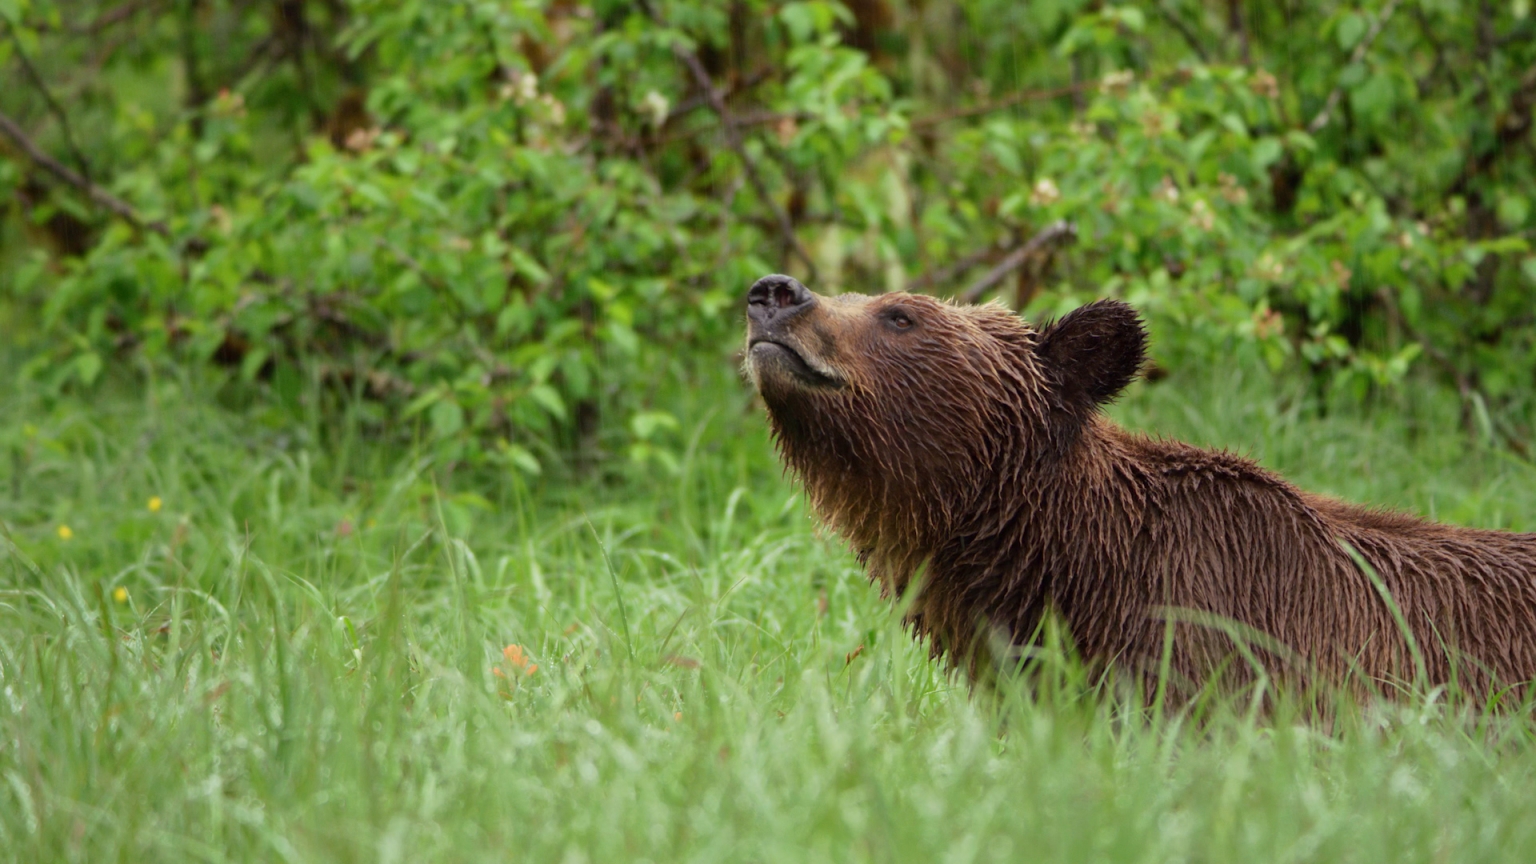 A close up of a bear lifting its head above the grass in the Great Bear Rainforest.